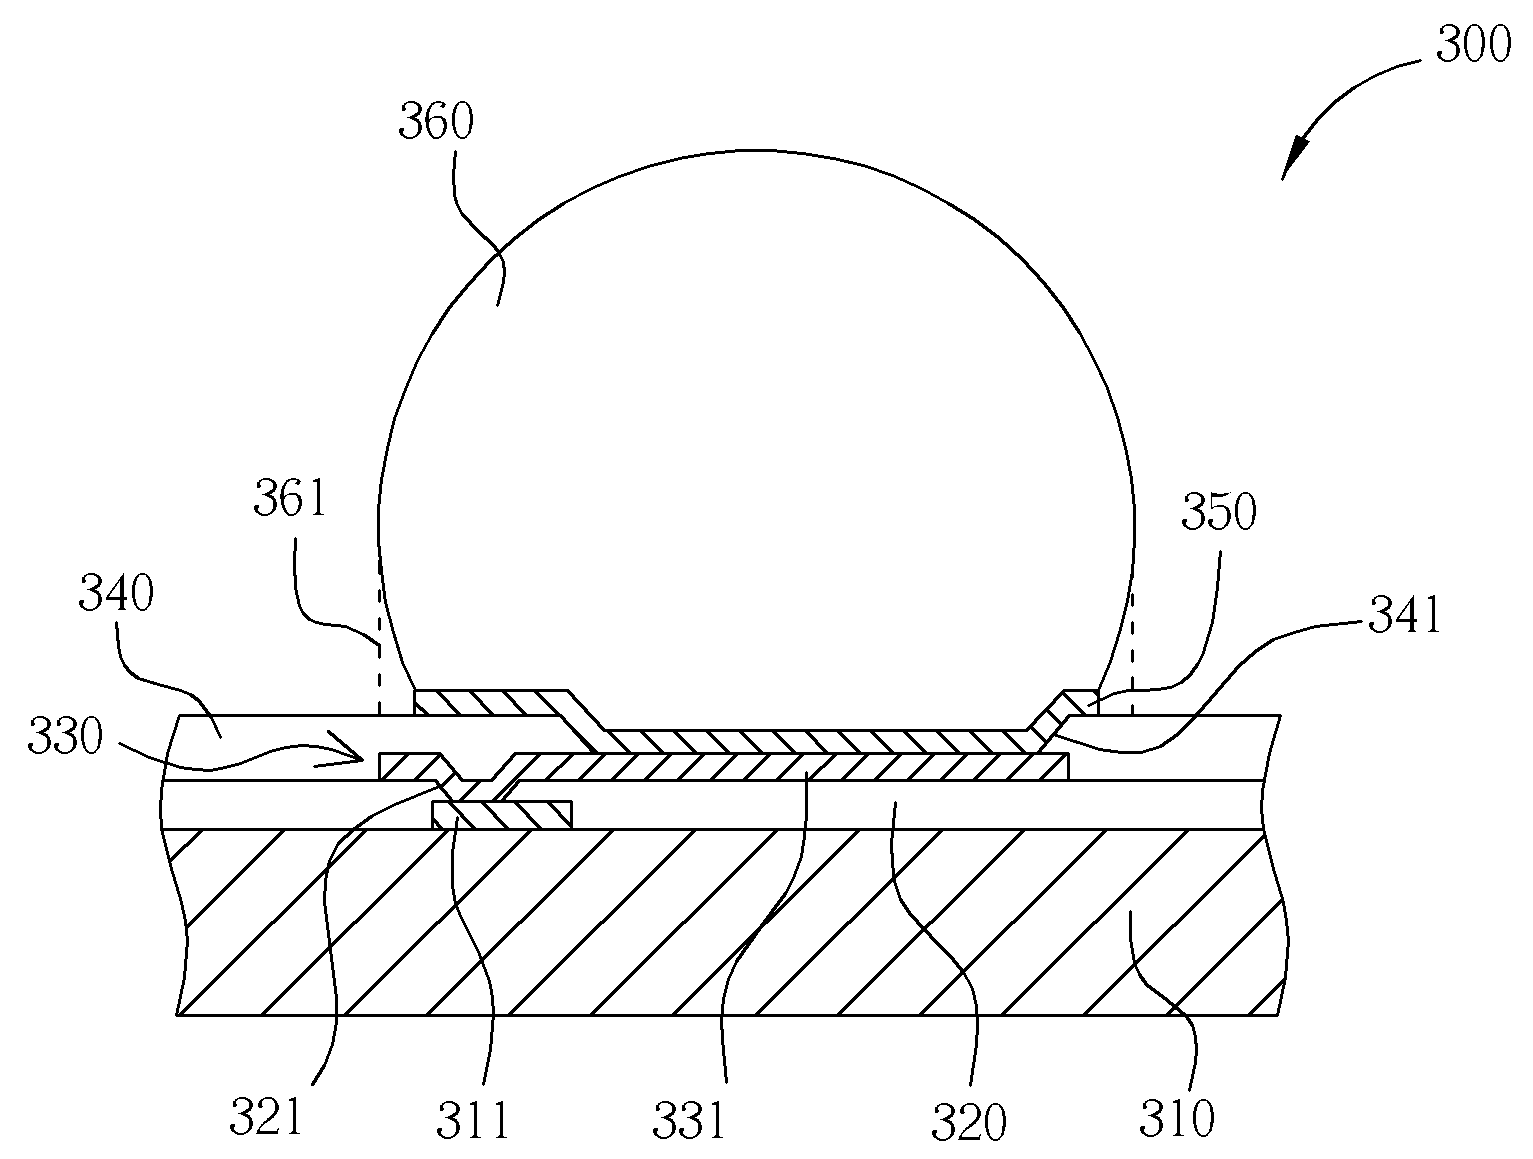 Redistribution connecting structure of solder balls